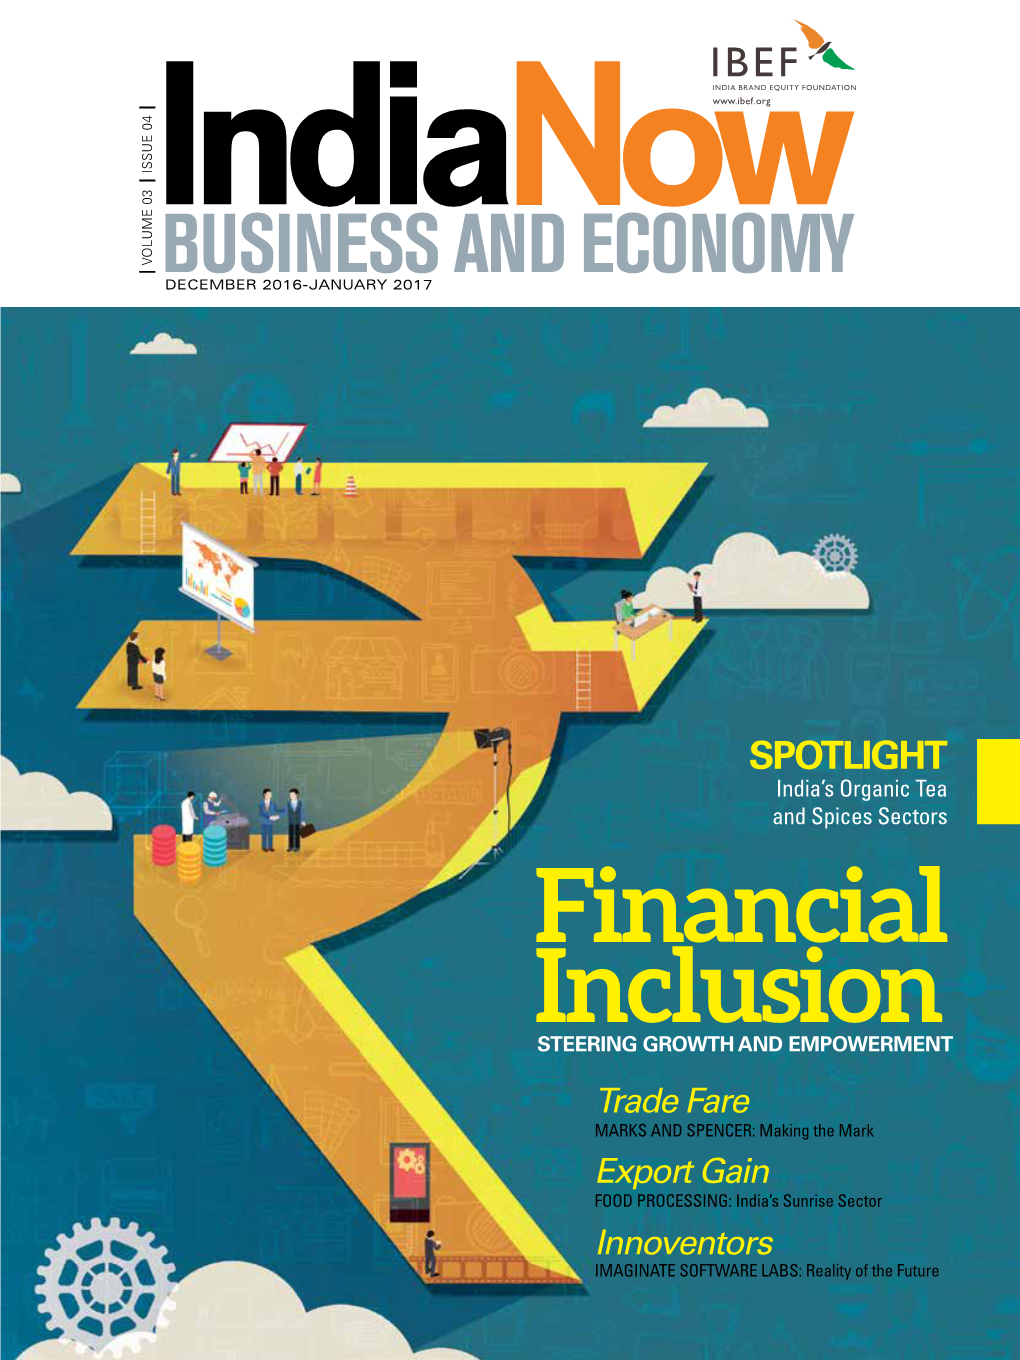 Financial Inclusion India Is Going the Extra Mile to Ensure Financial Inclusion at All Levels